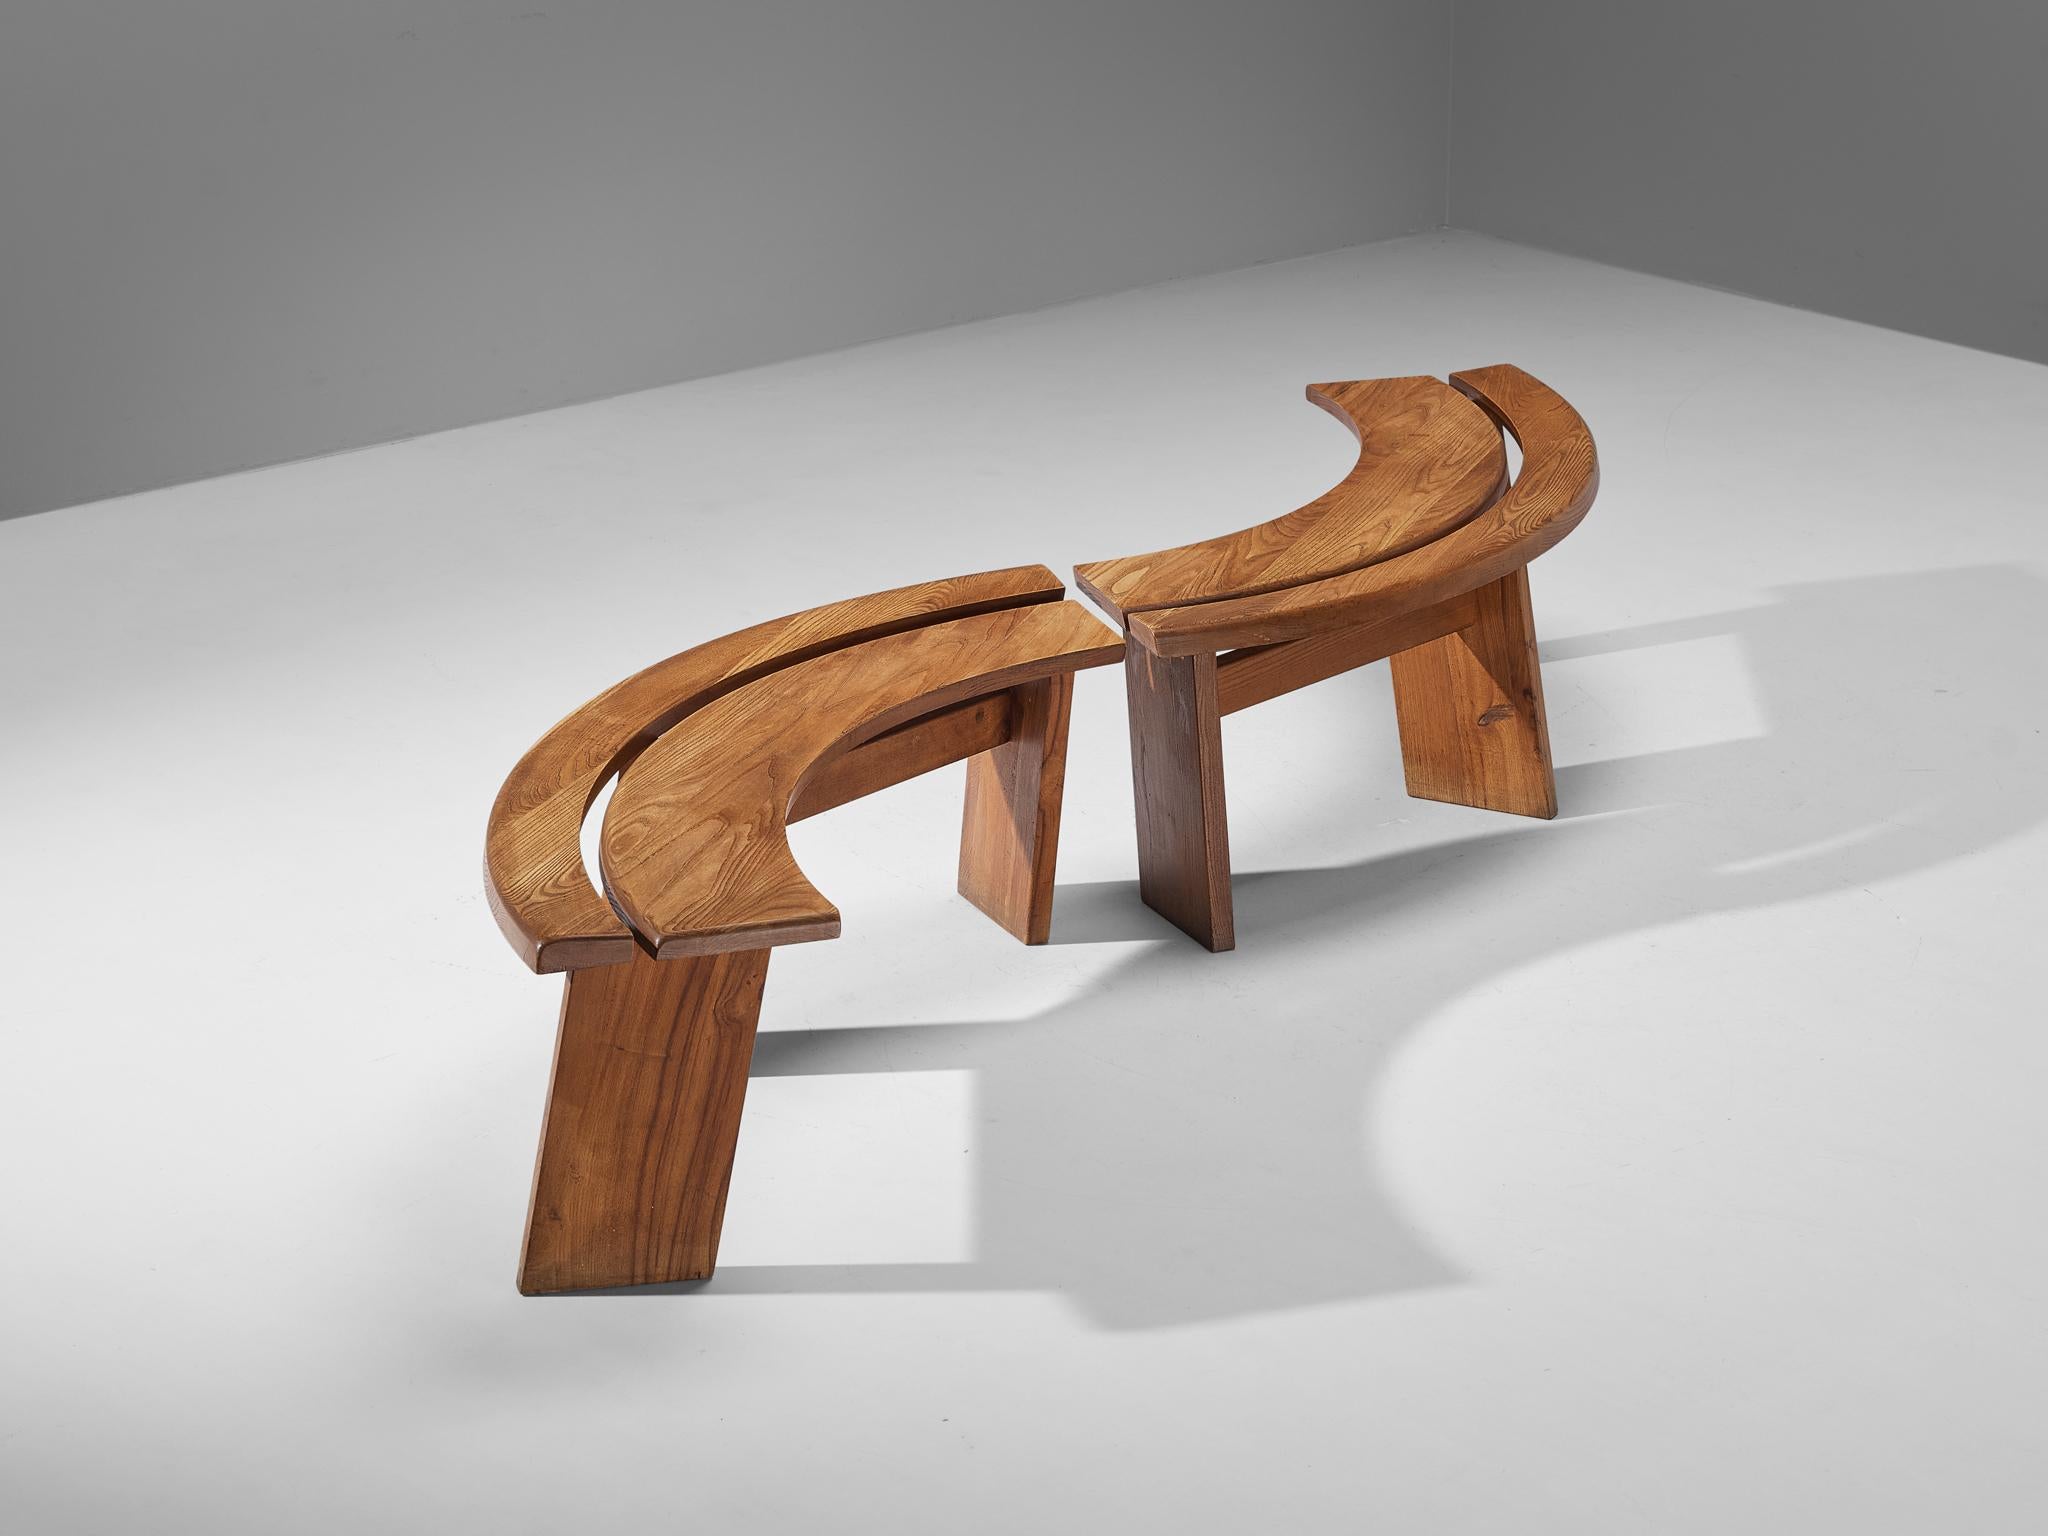 Pierre Chapo, benches model 'S38A', elm, France, 1960s.

This set of benches are early editions designed by Pierre Chapo, known for his hallmark use of solid elmwood and a commitment to pure and clean design and construction principles. The ‘S38A’